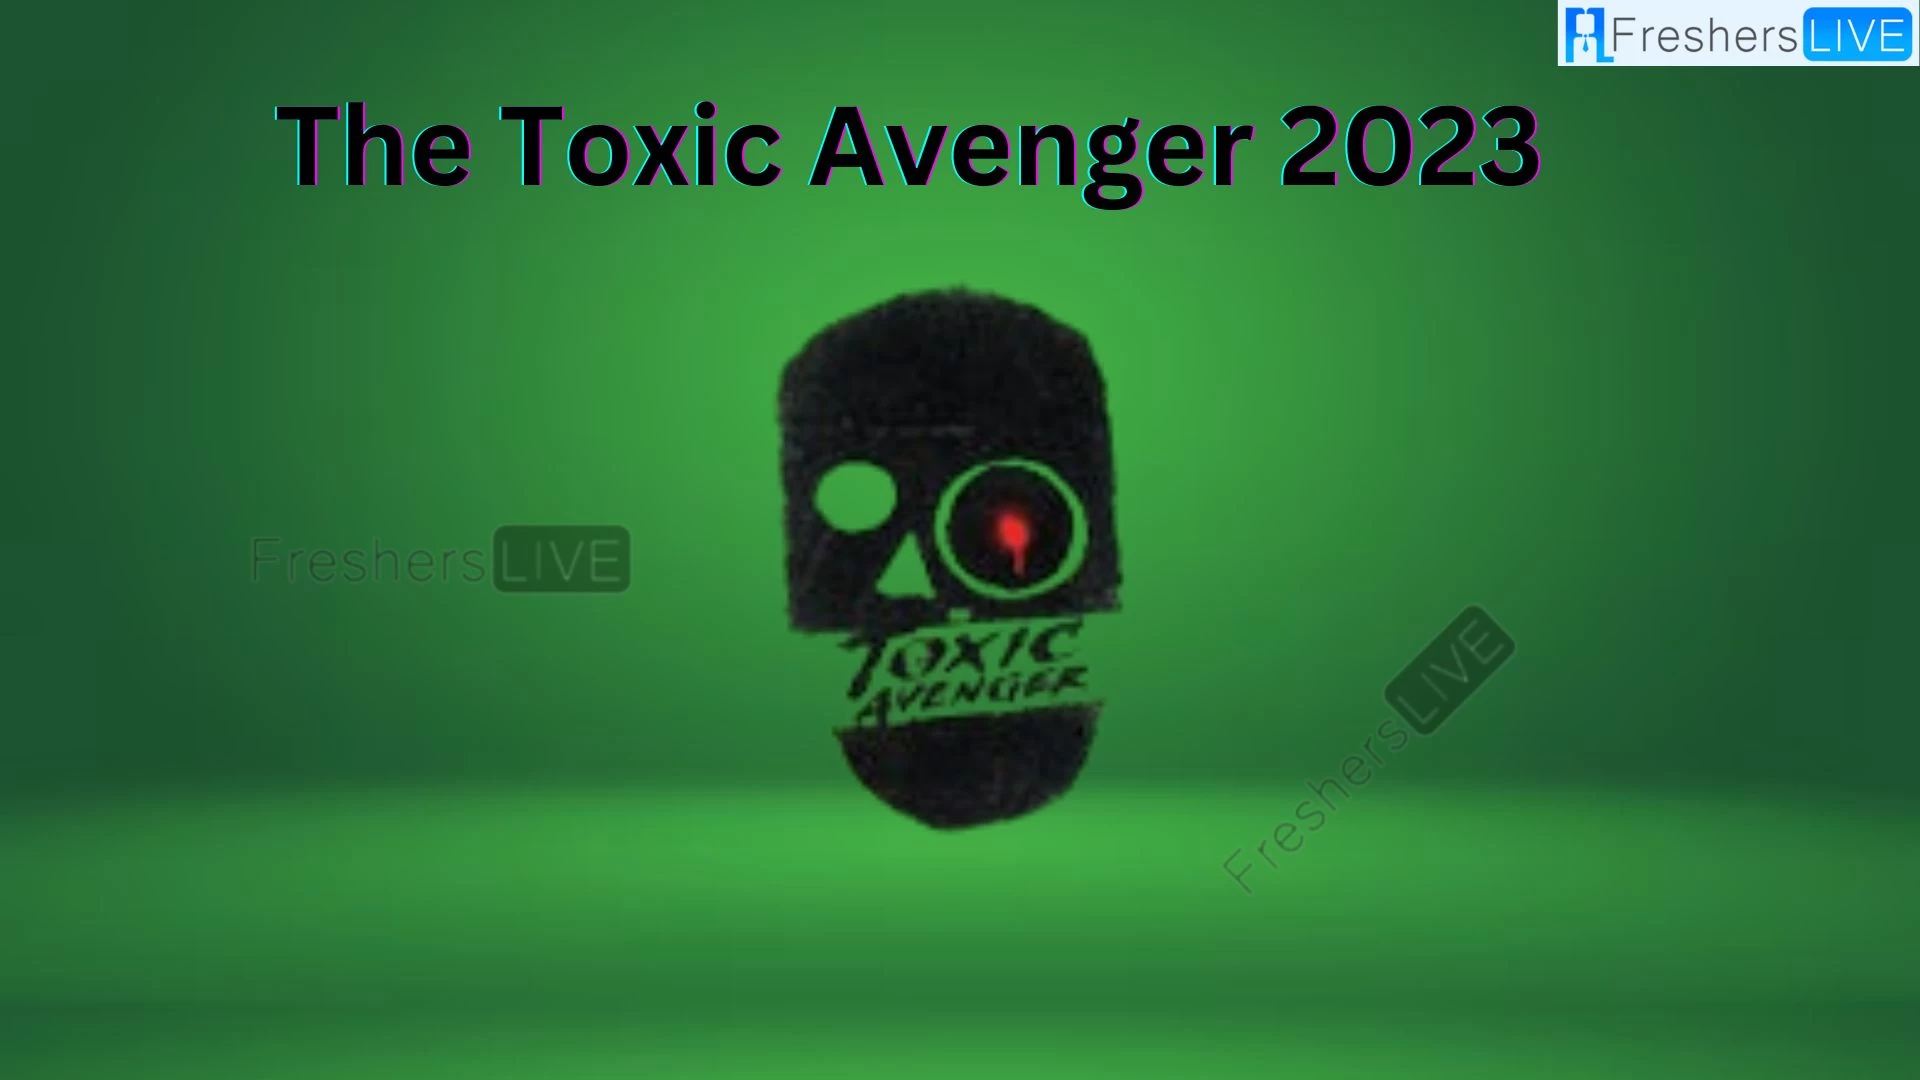 Where to Watch The Toxic Avenger 2023? Who is Playing the New Toxic Avenger?